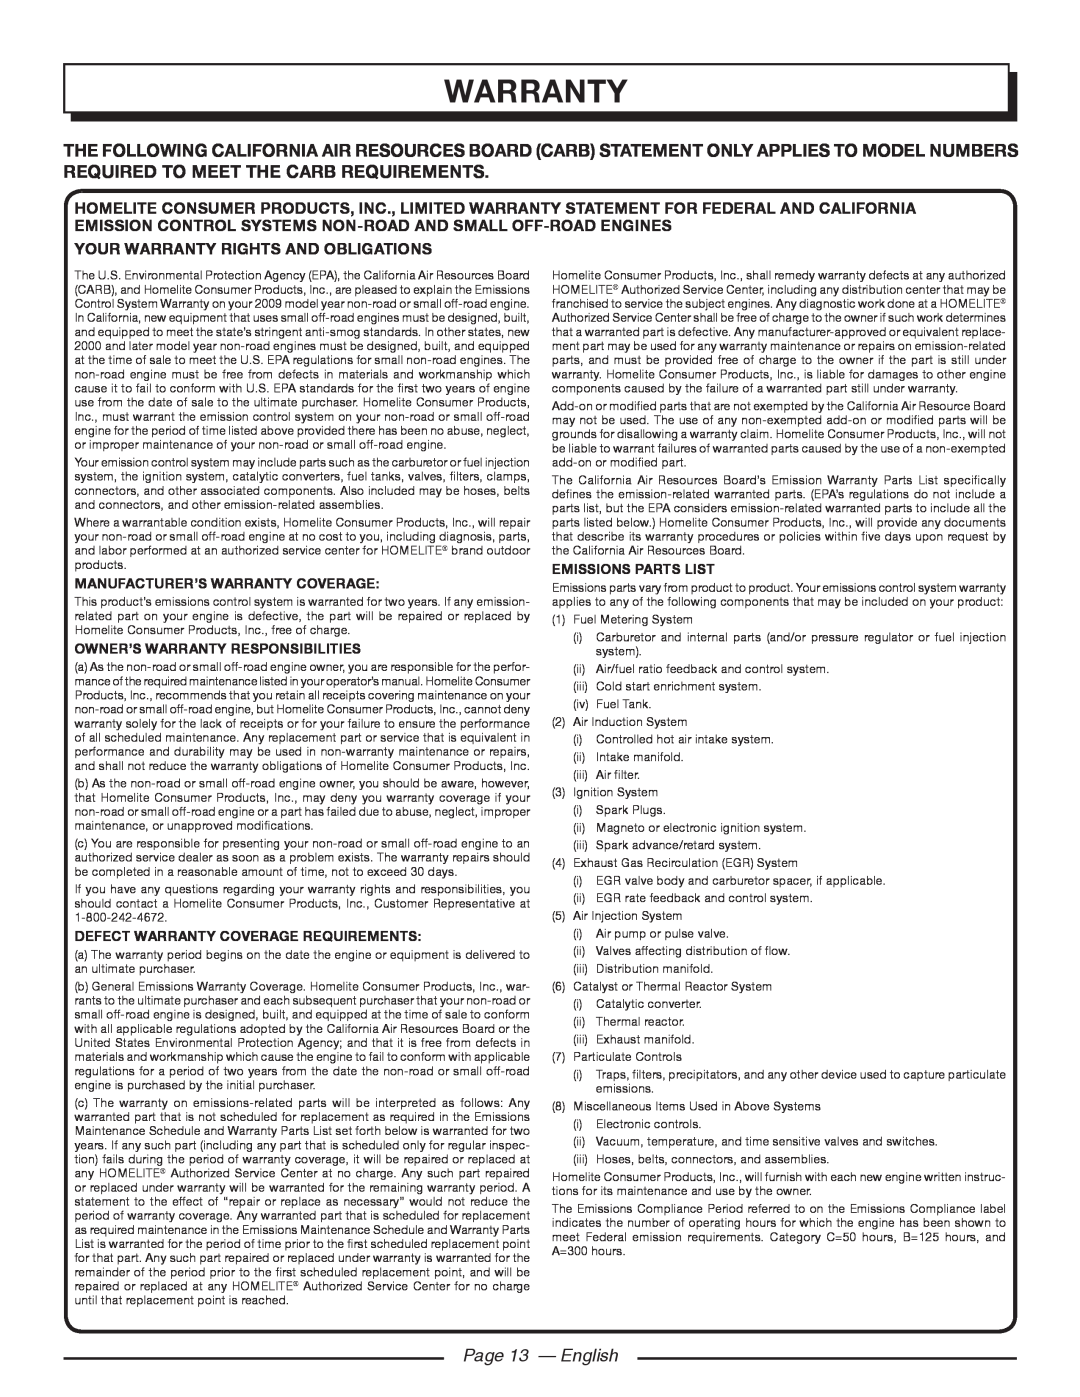 Homelite UT21006 Page 13 - English, Manufacturer’S Warranty Coverage, Owner’S Warranty Responsibilities 